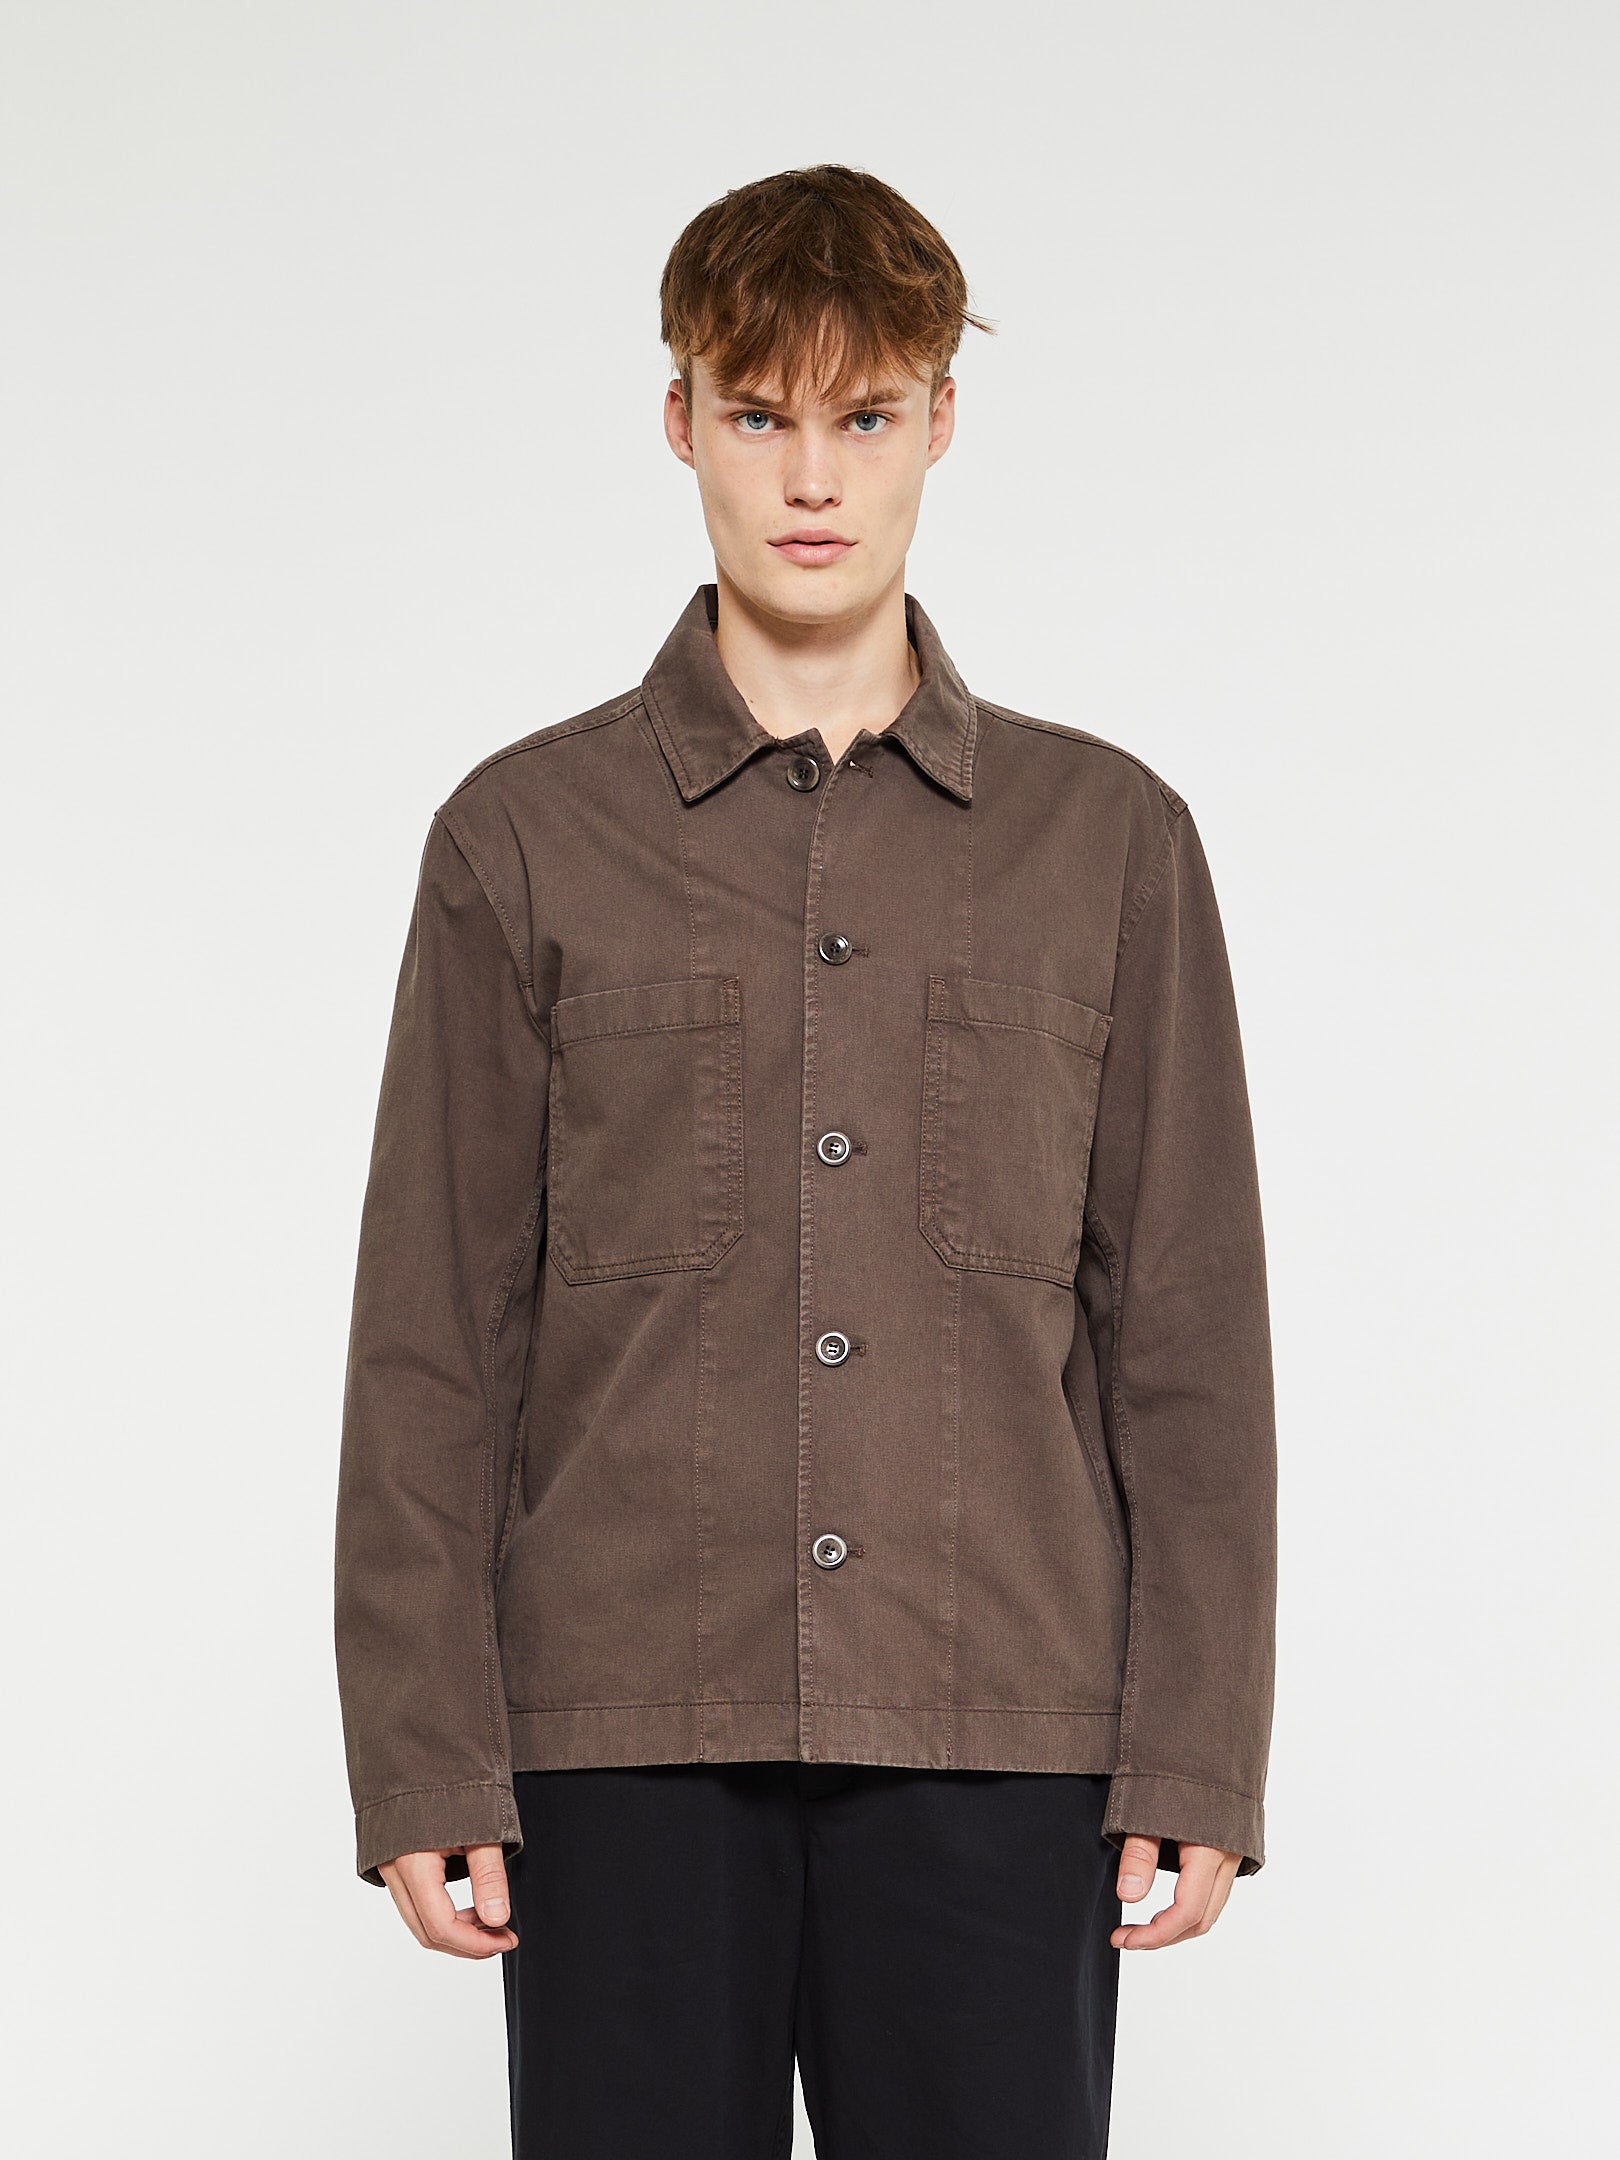 Norse Projects - Tyge Overshirt in Heathland Brown